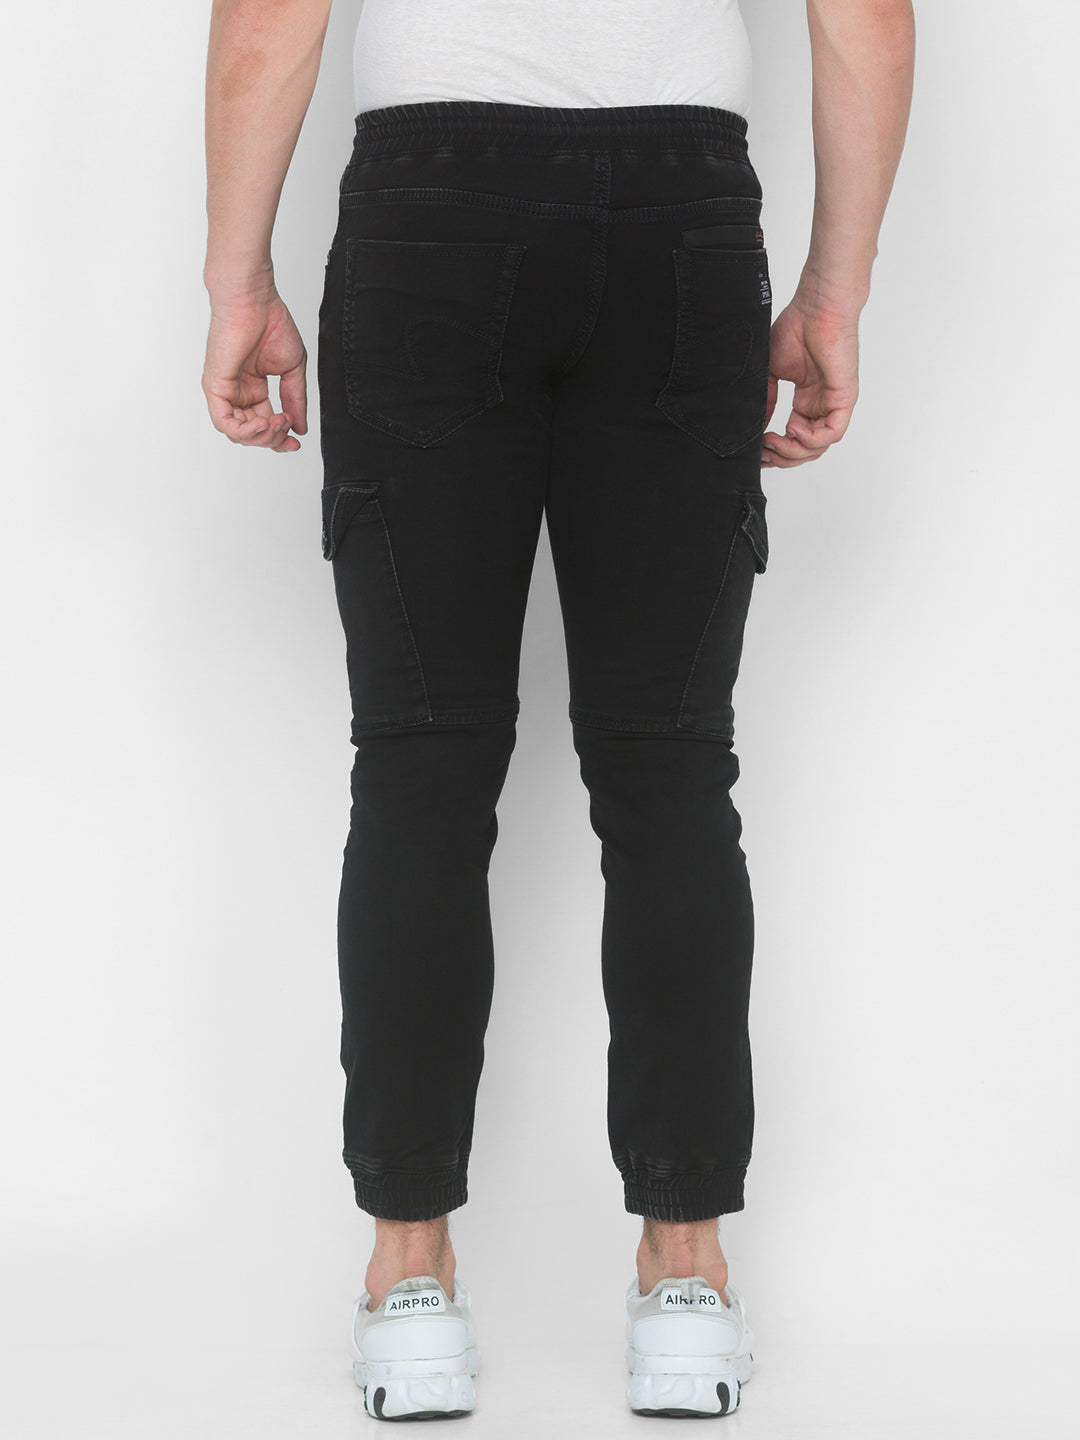 Buy The Pima French Terry Pants Carbon Black by CREATURES OF HABIT MEN at  Ogaan Market Online Shopping Site